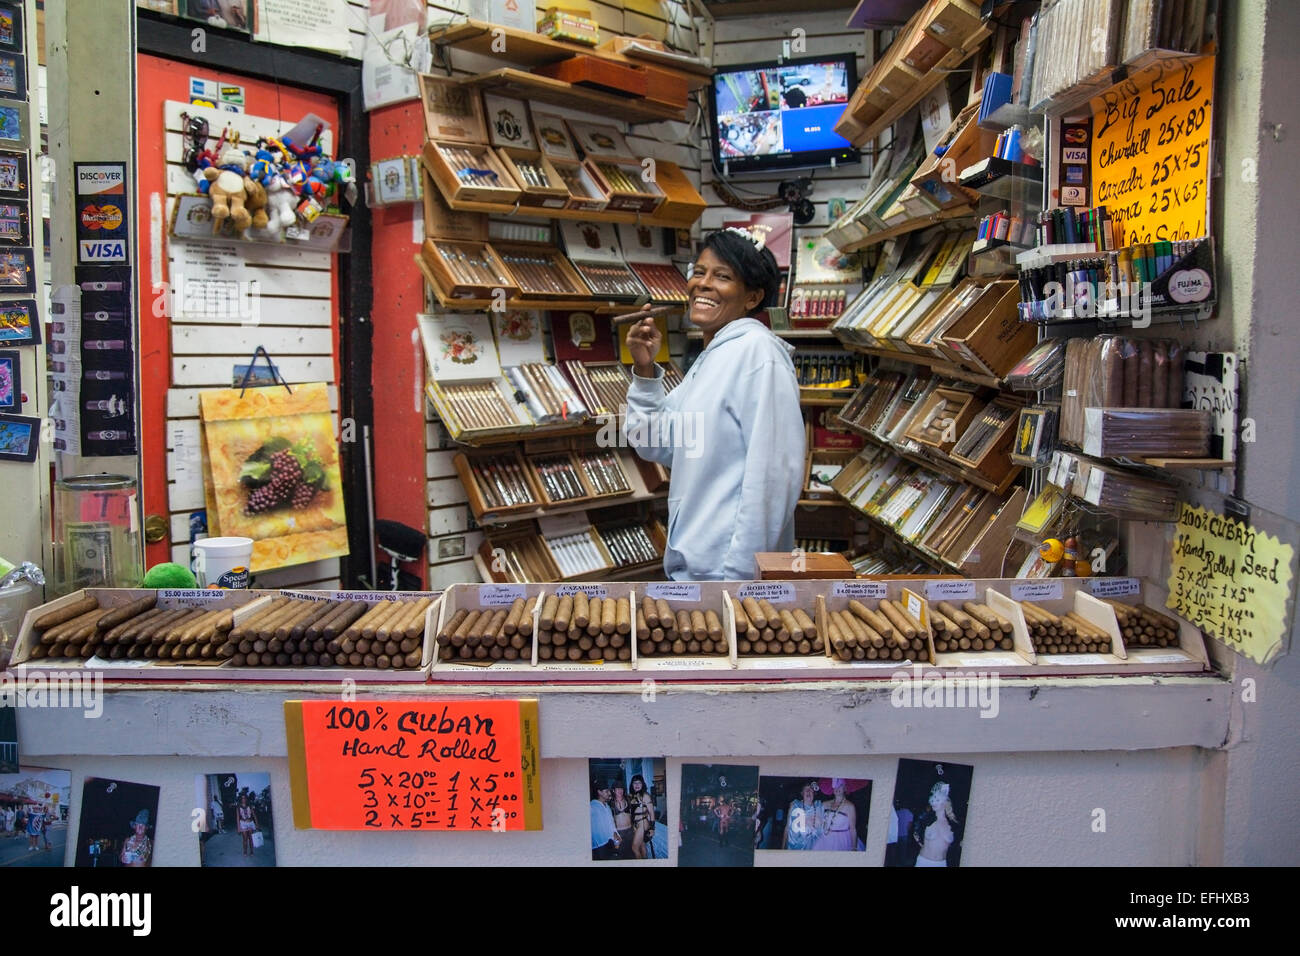 Woman selling cigars in a tobacco shop on Duval Street, Key West, Florida Keys, USA Stock Photo